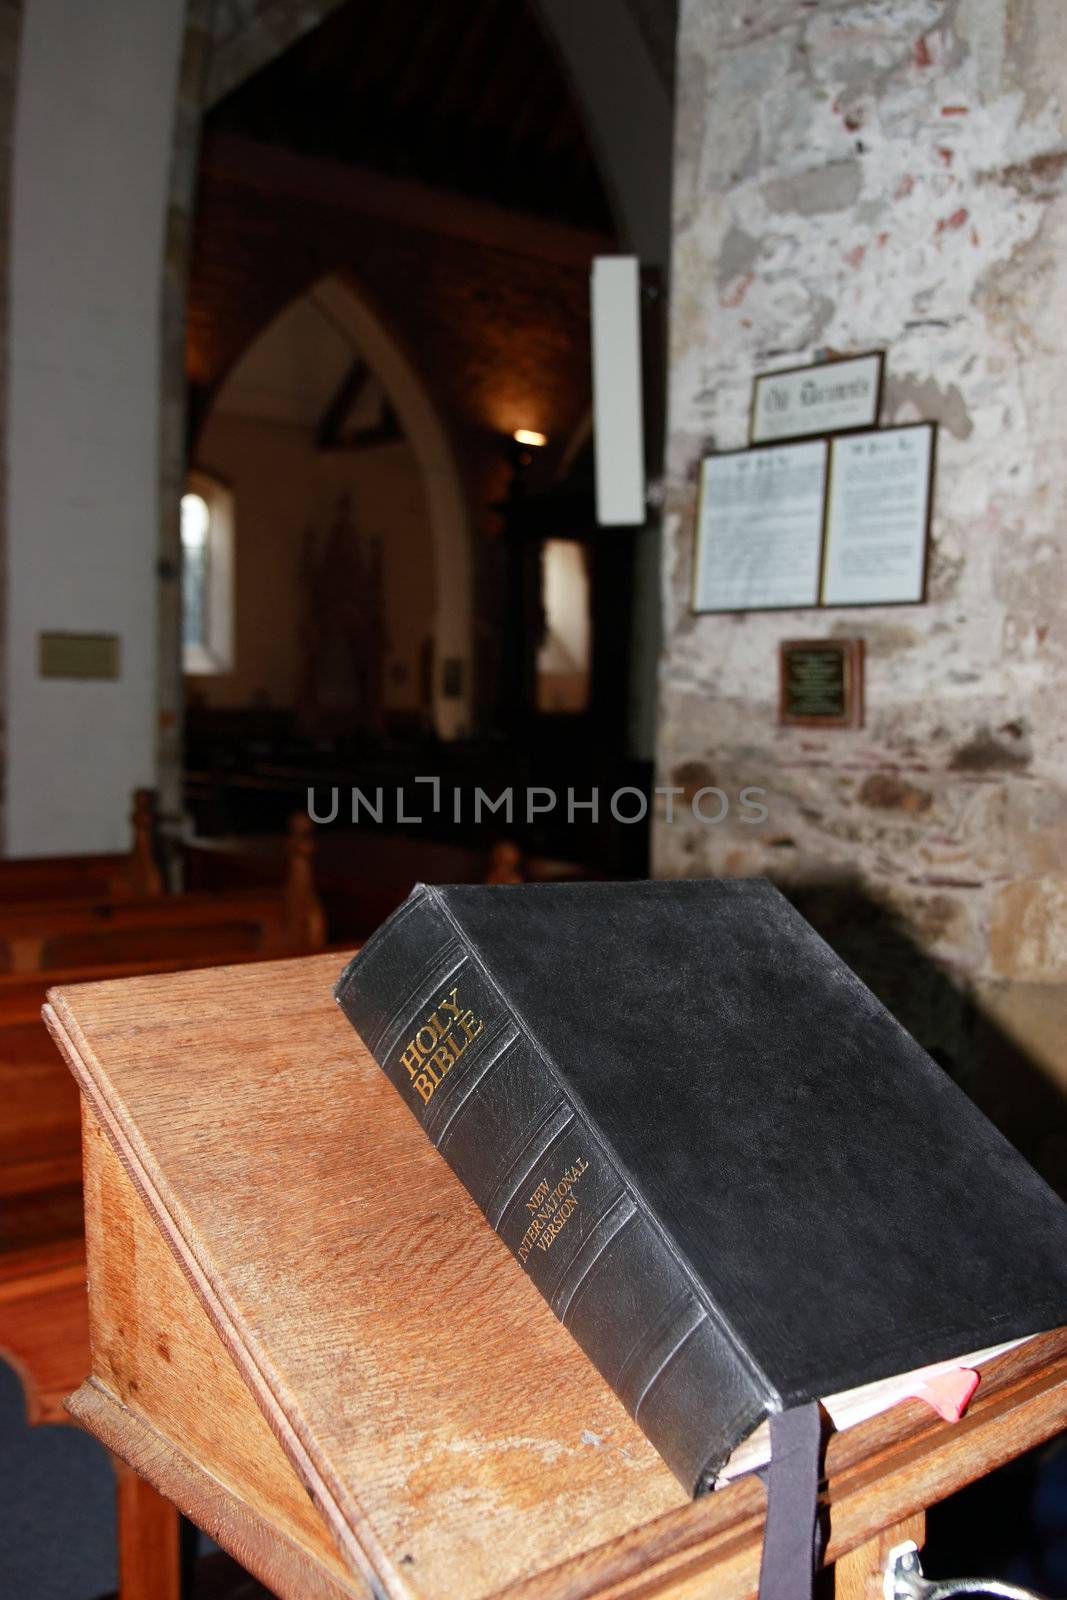 a bible on a stand in an old church